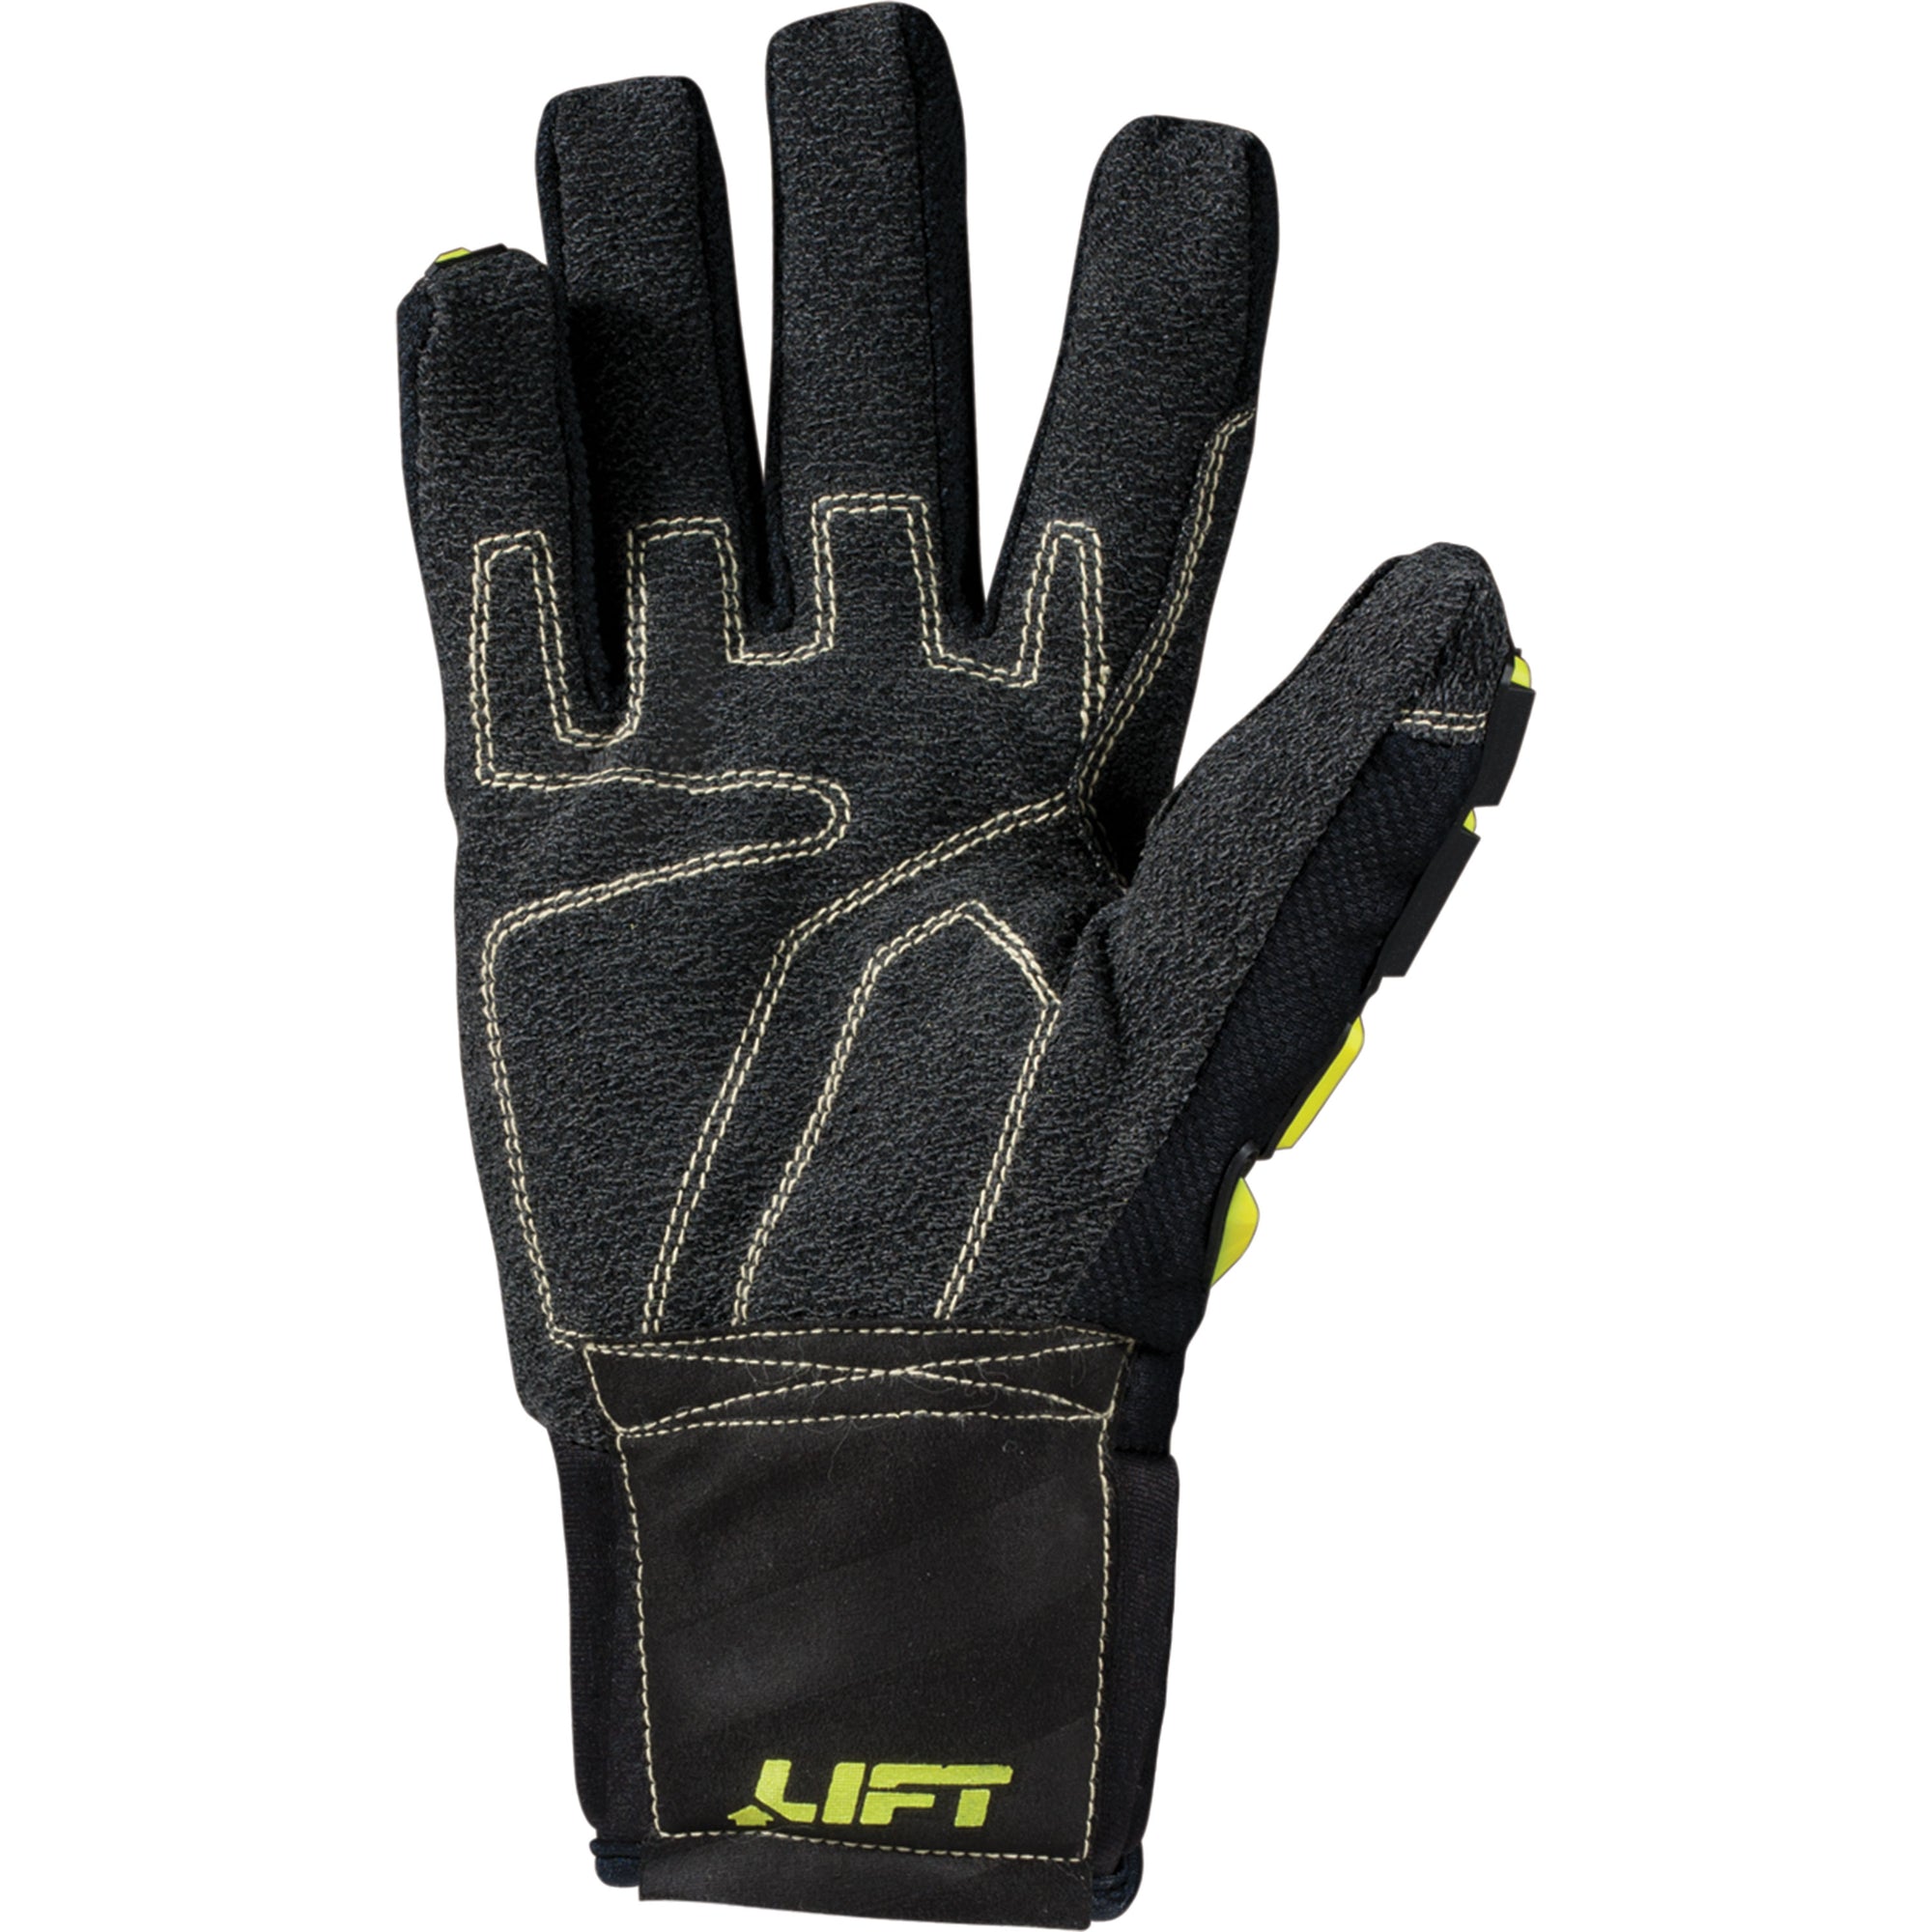 LIFT Safety - RIGGER Winter Rated Glove